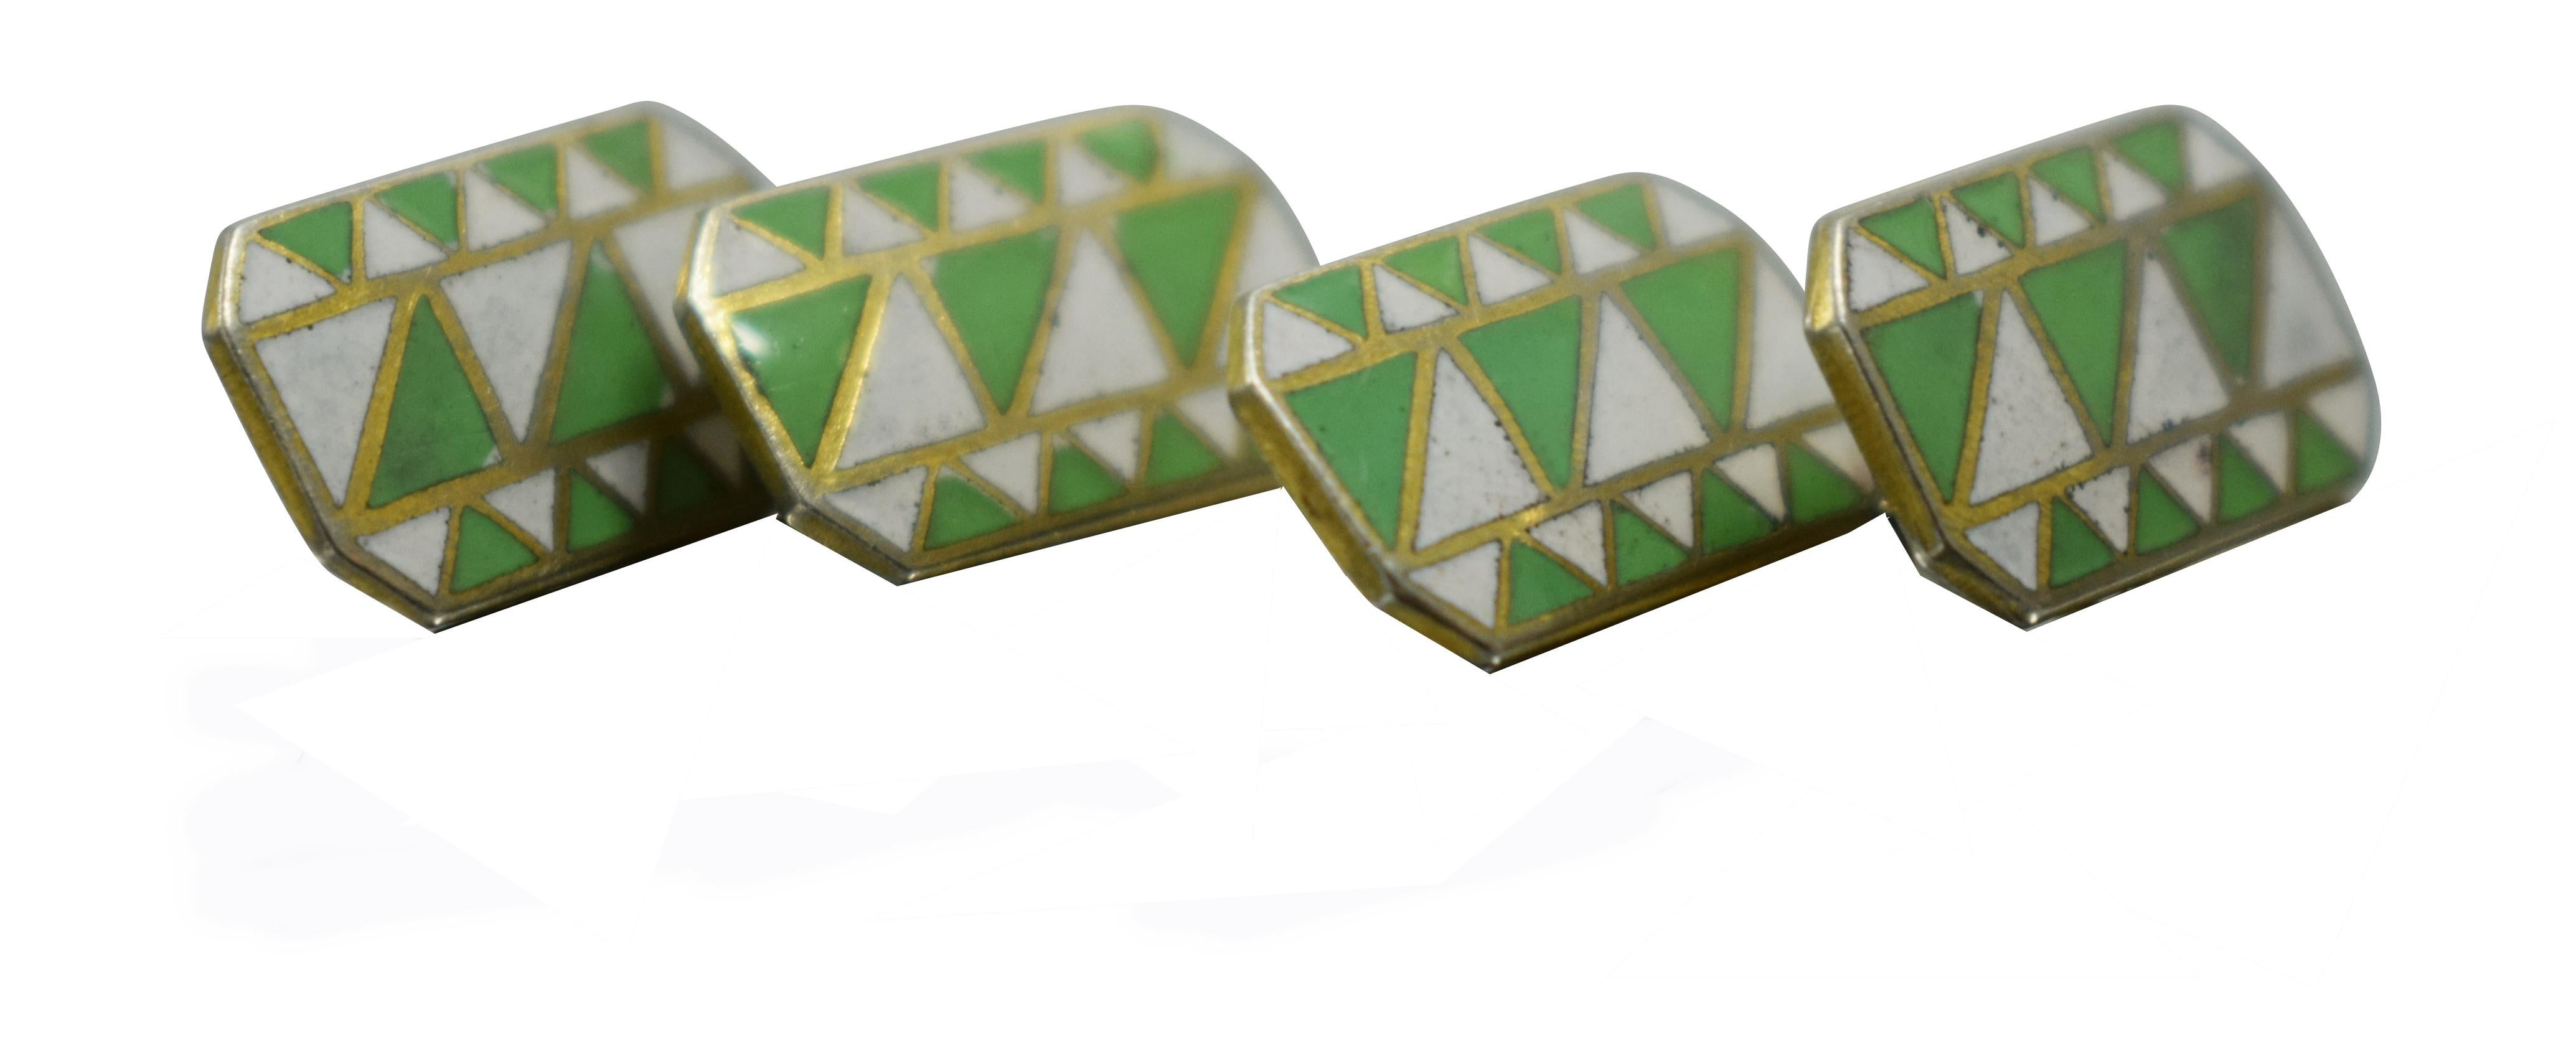 A rare find are these totally original enamel cufflinks from the 1930's. Great Art Deco geometric styling and colour, can't be confused with any other era can they? Condition is great with minimal signs of age. Ideal for todays dapper gentleman.